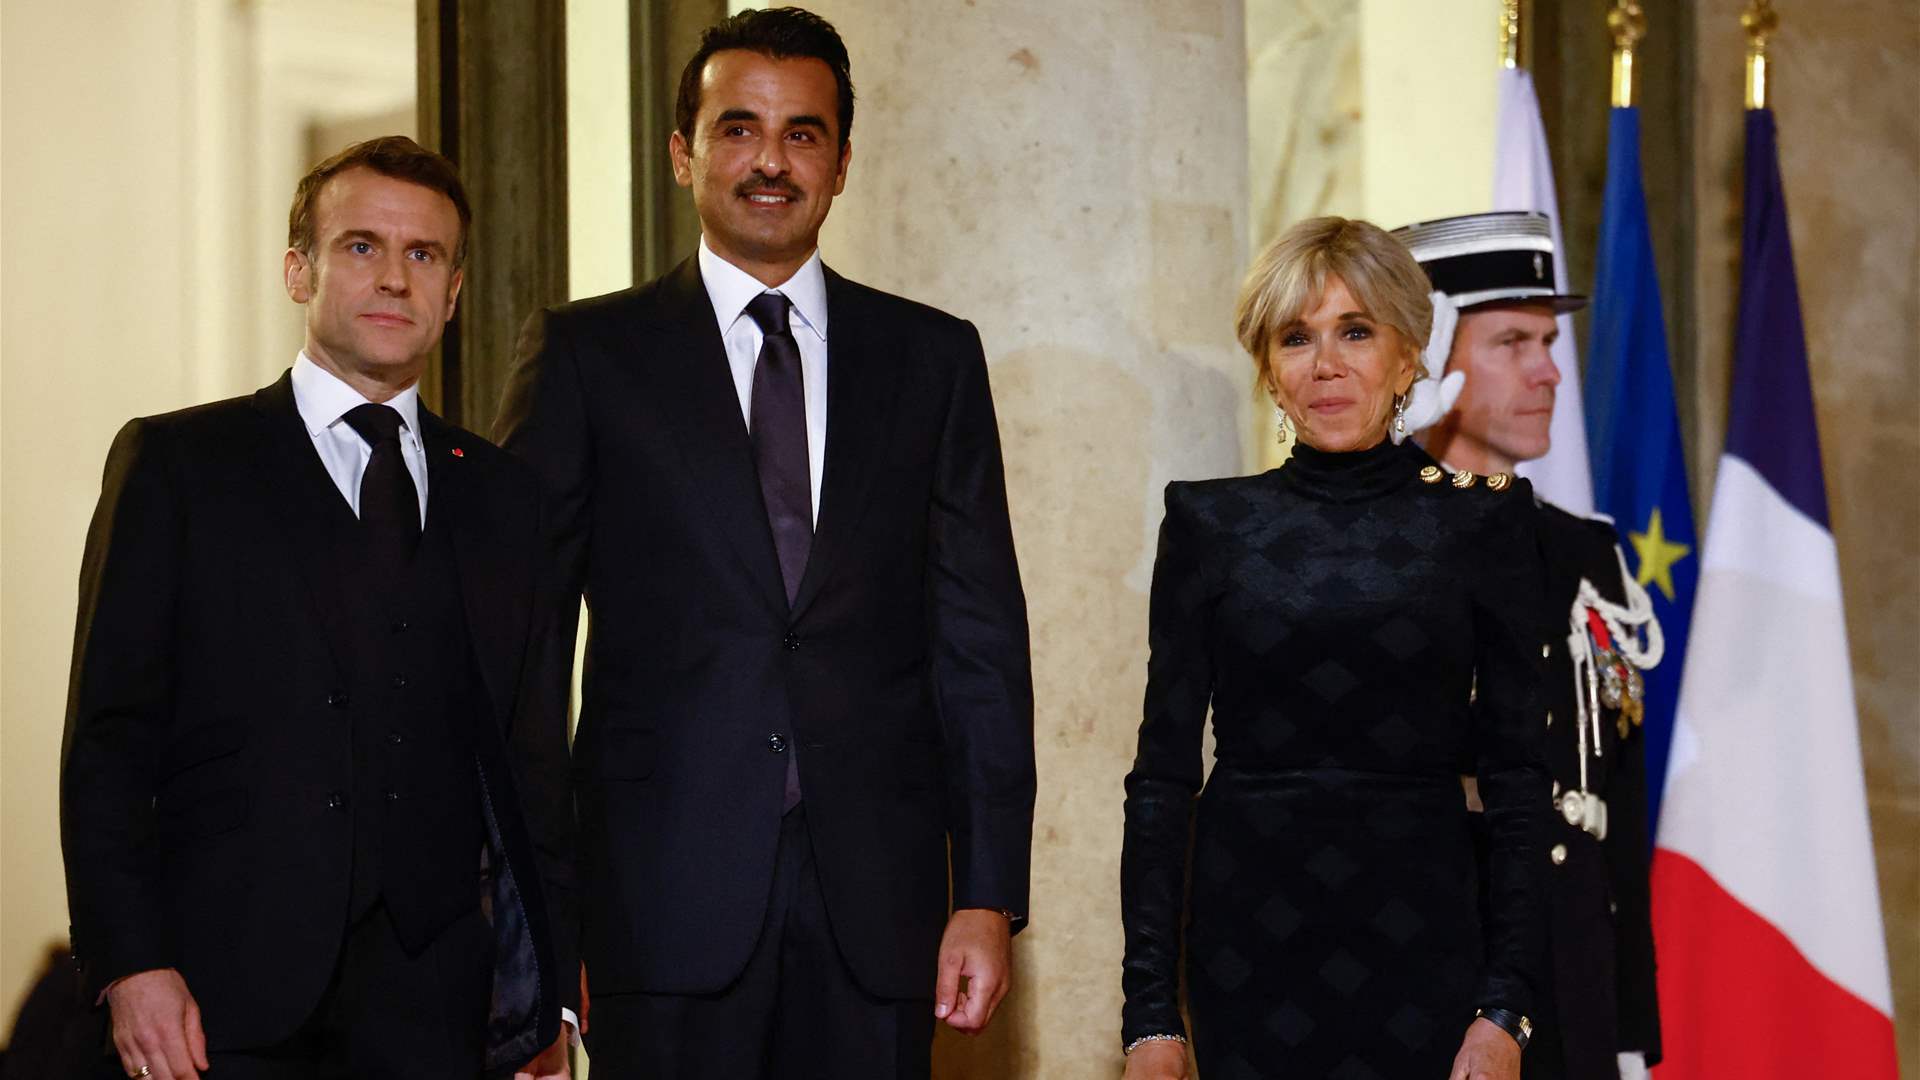 Lebanese file, Gaza conflict take center stage: Highlights of Qatar&#39;s Emir state visit to France